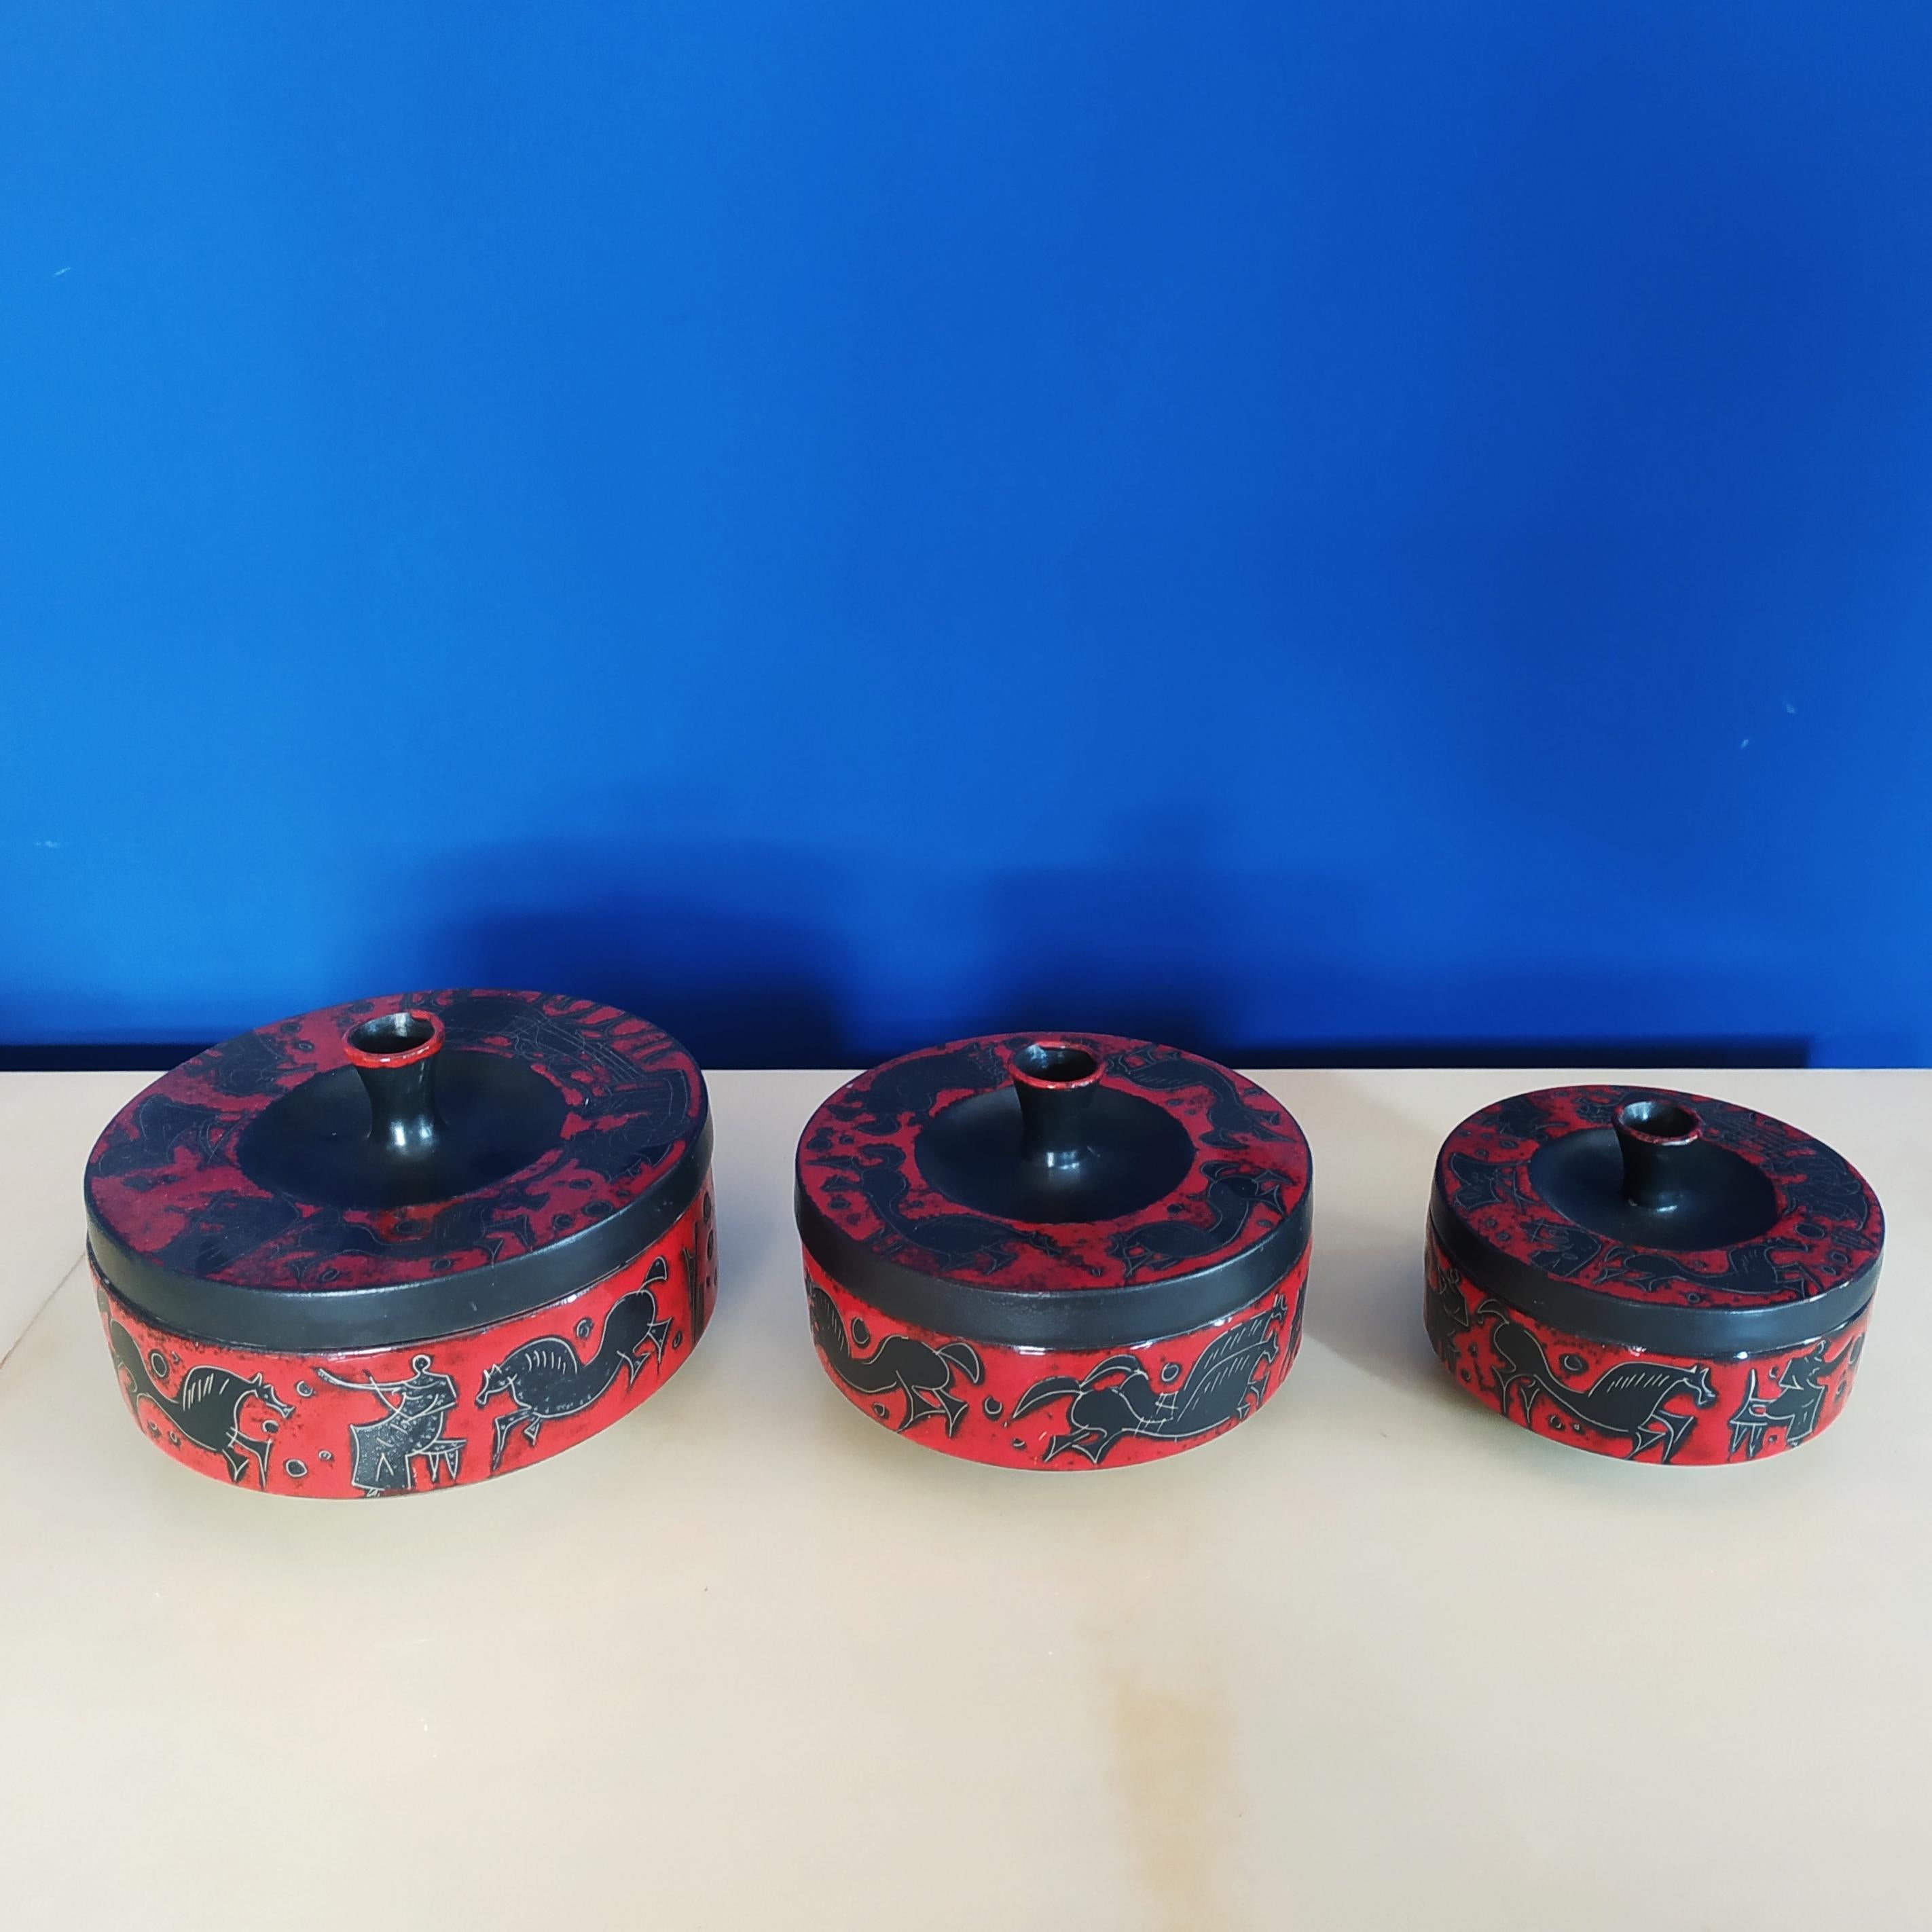 1950s Astonishing Set of 3 boxes red and black in ceramic.